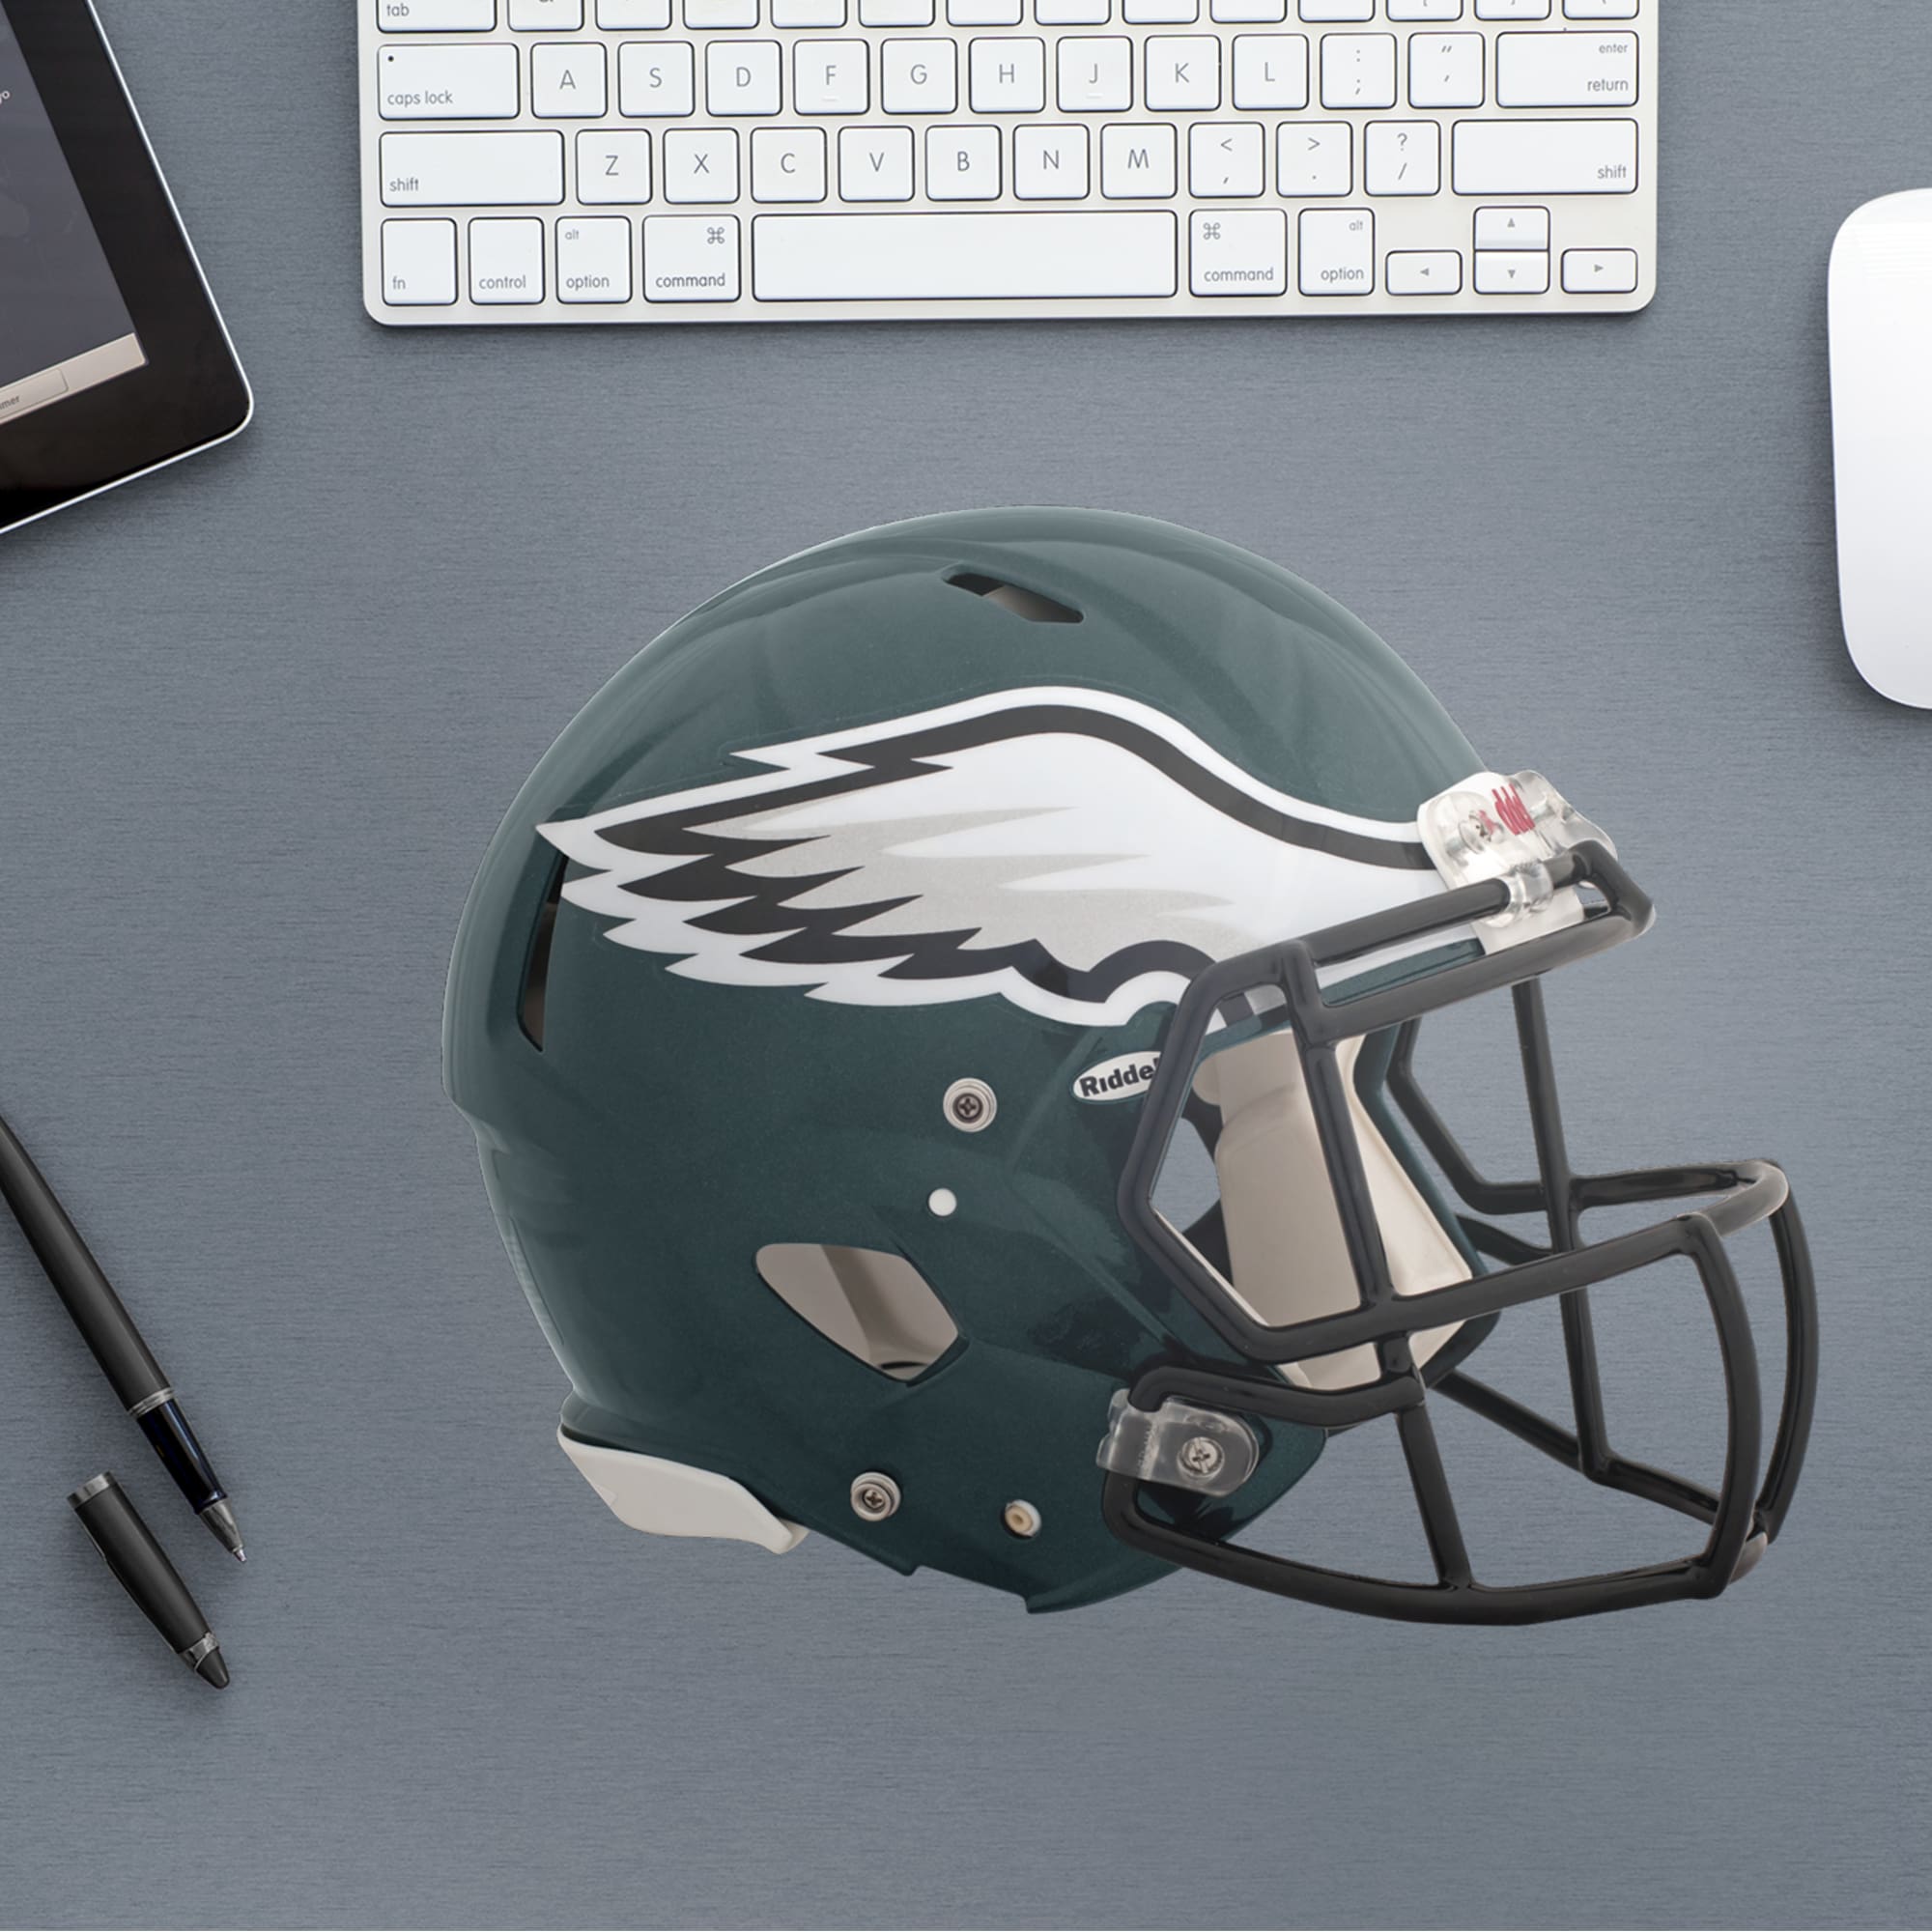 Philadelphia Eagles: Helmet - Officially Licensed NFL Removable Wall Decal Large by Fathead | Vinyl